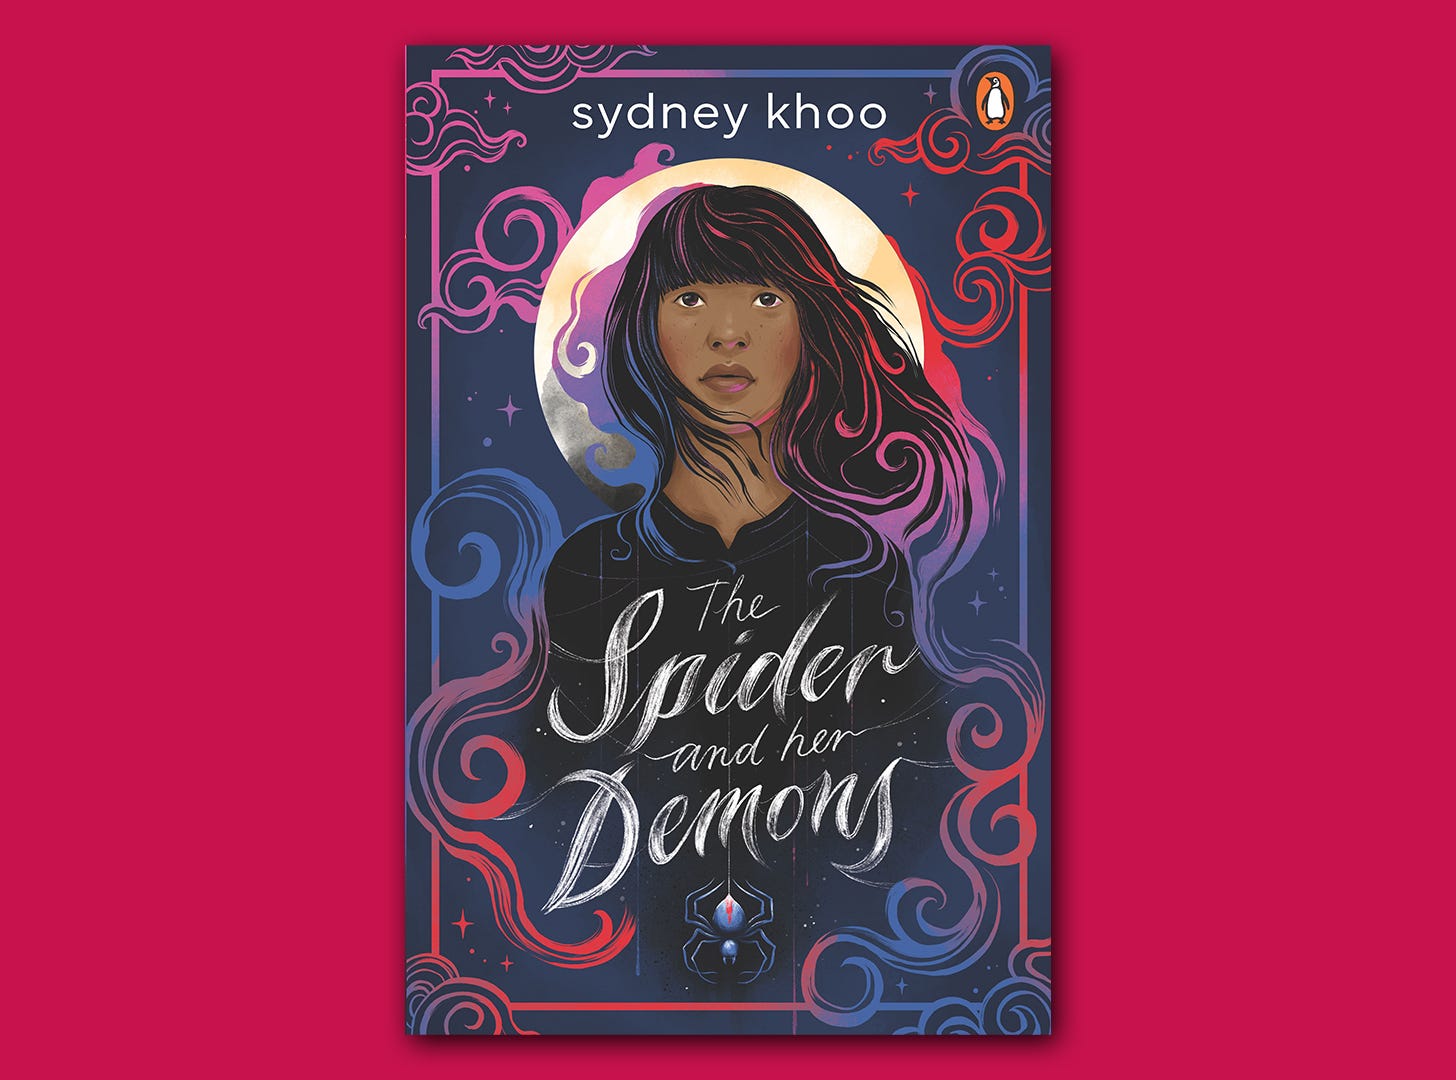 The book cover for "The Spider and her Demons" superimposed on a block hot pink background. It is an illustrated book cover showing a Malaysian Chinese girl standing in front of a white moon.